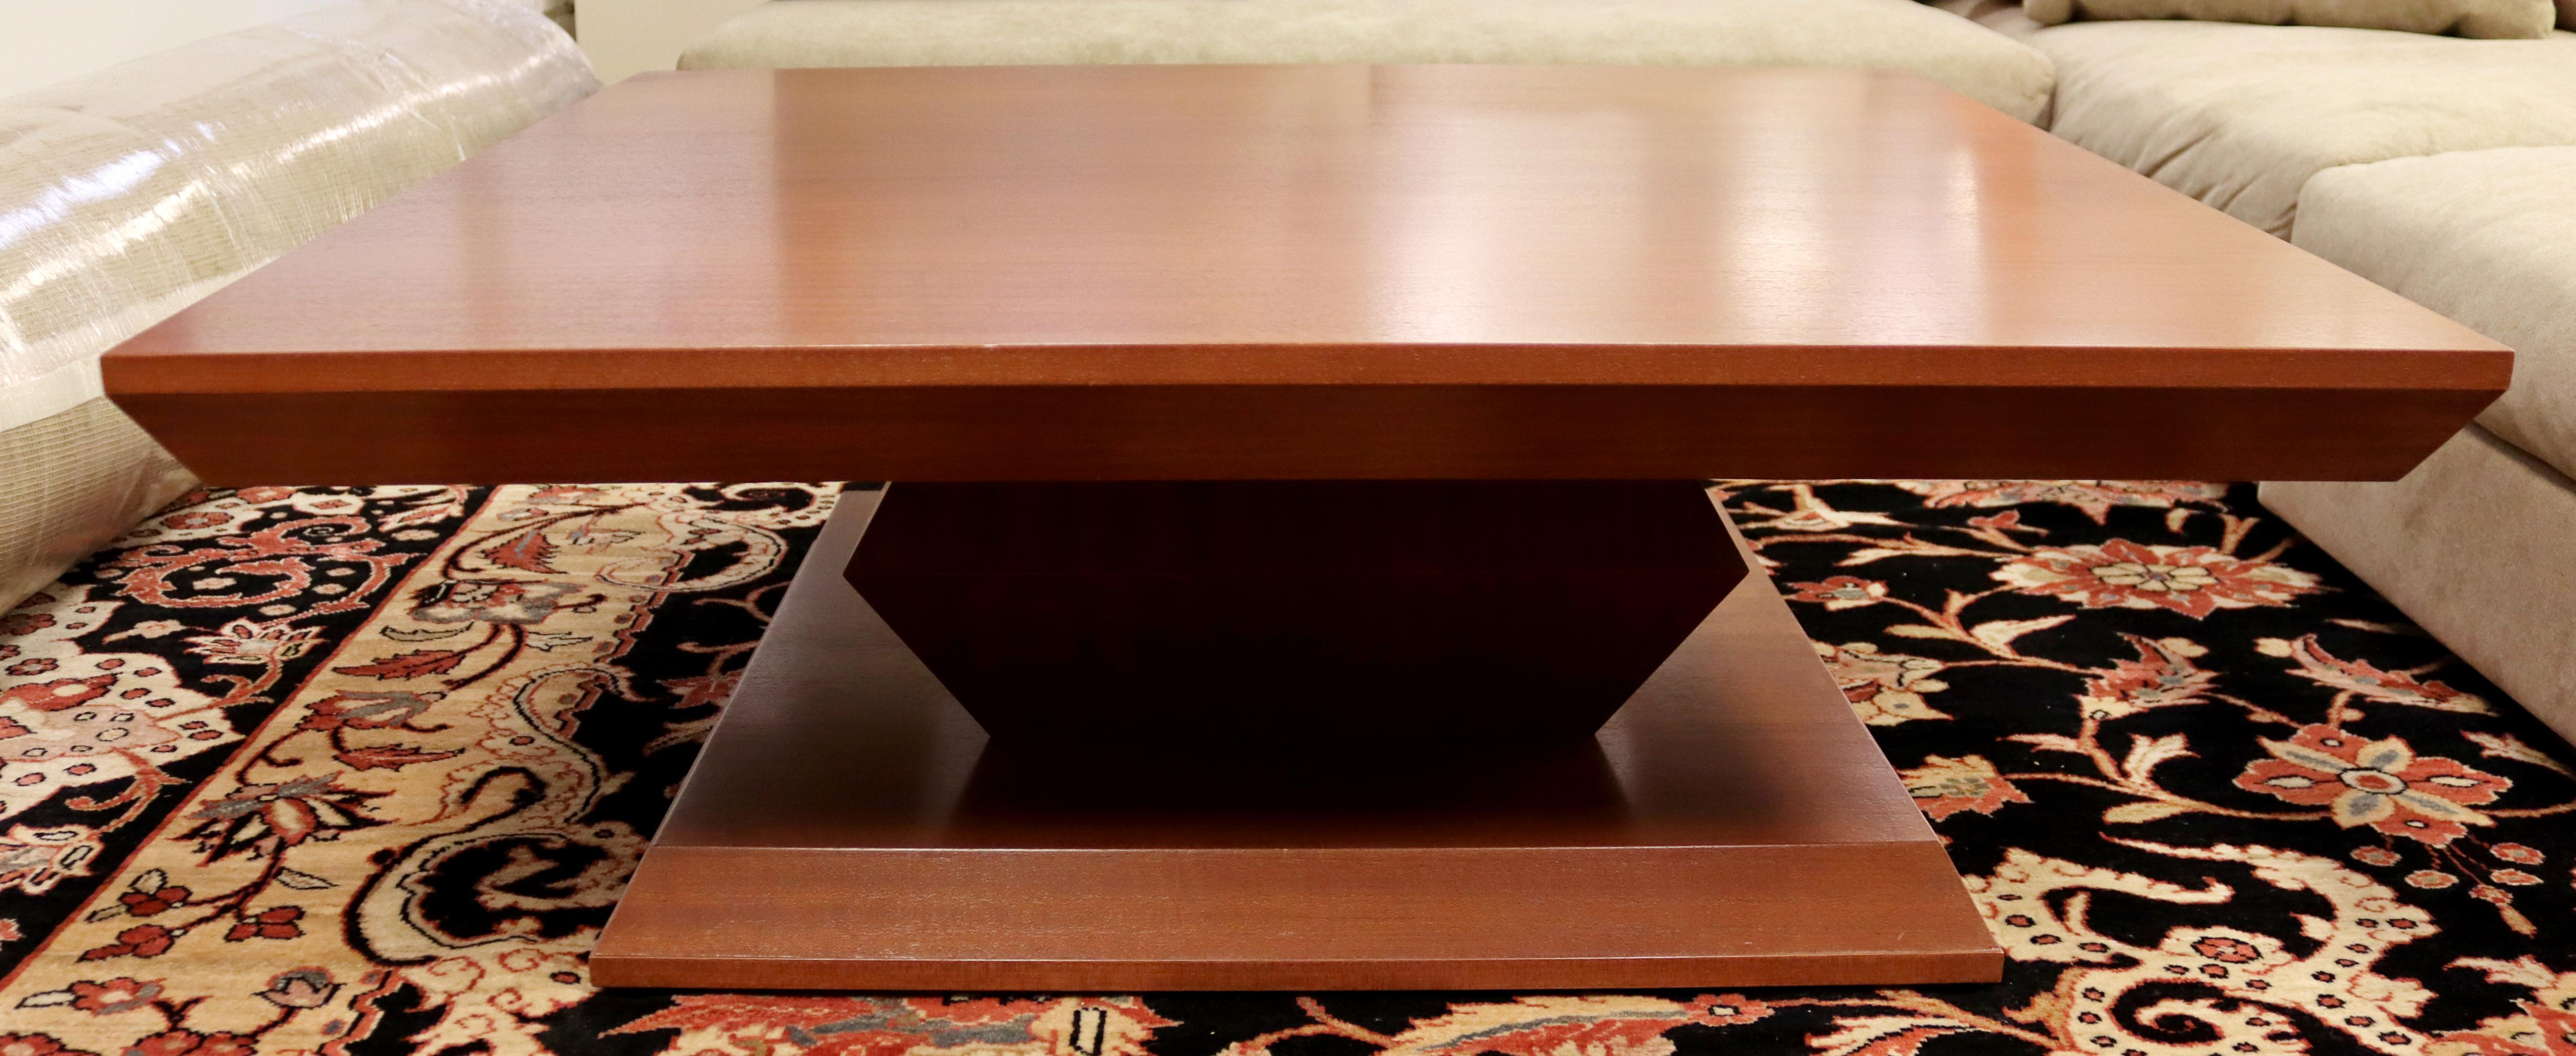 For your consideration is a special, low and square coffee table, made of African mahogany wood, by Antoine Proulx, circa the 1990s. In good condition. The dimensions are 42.25